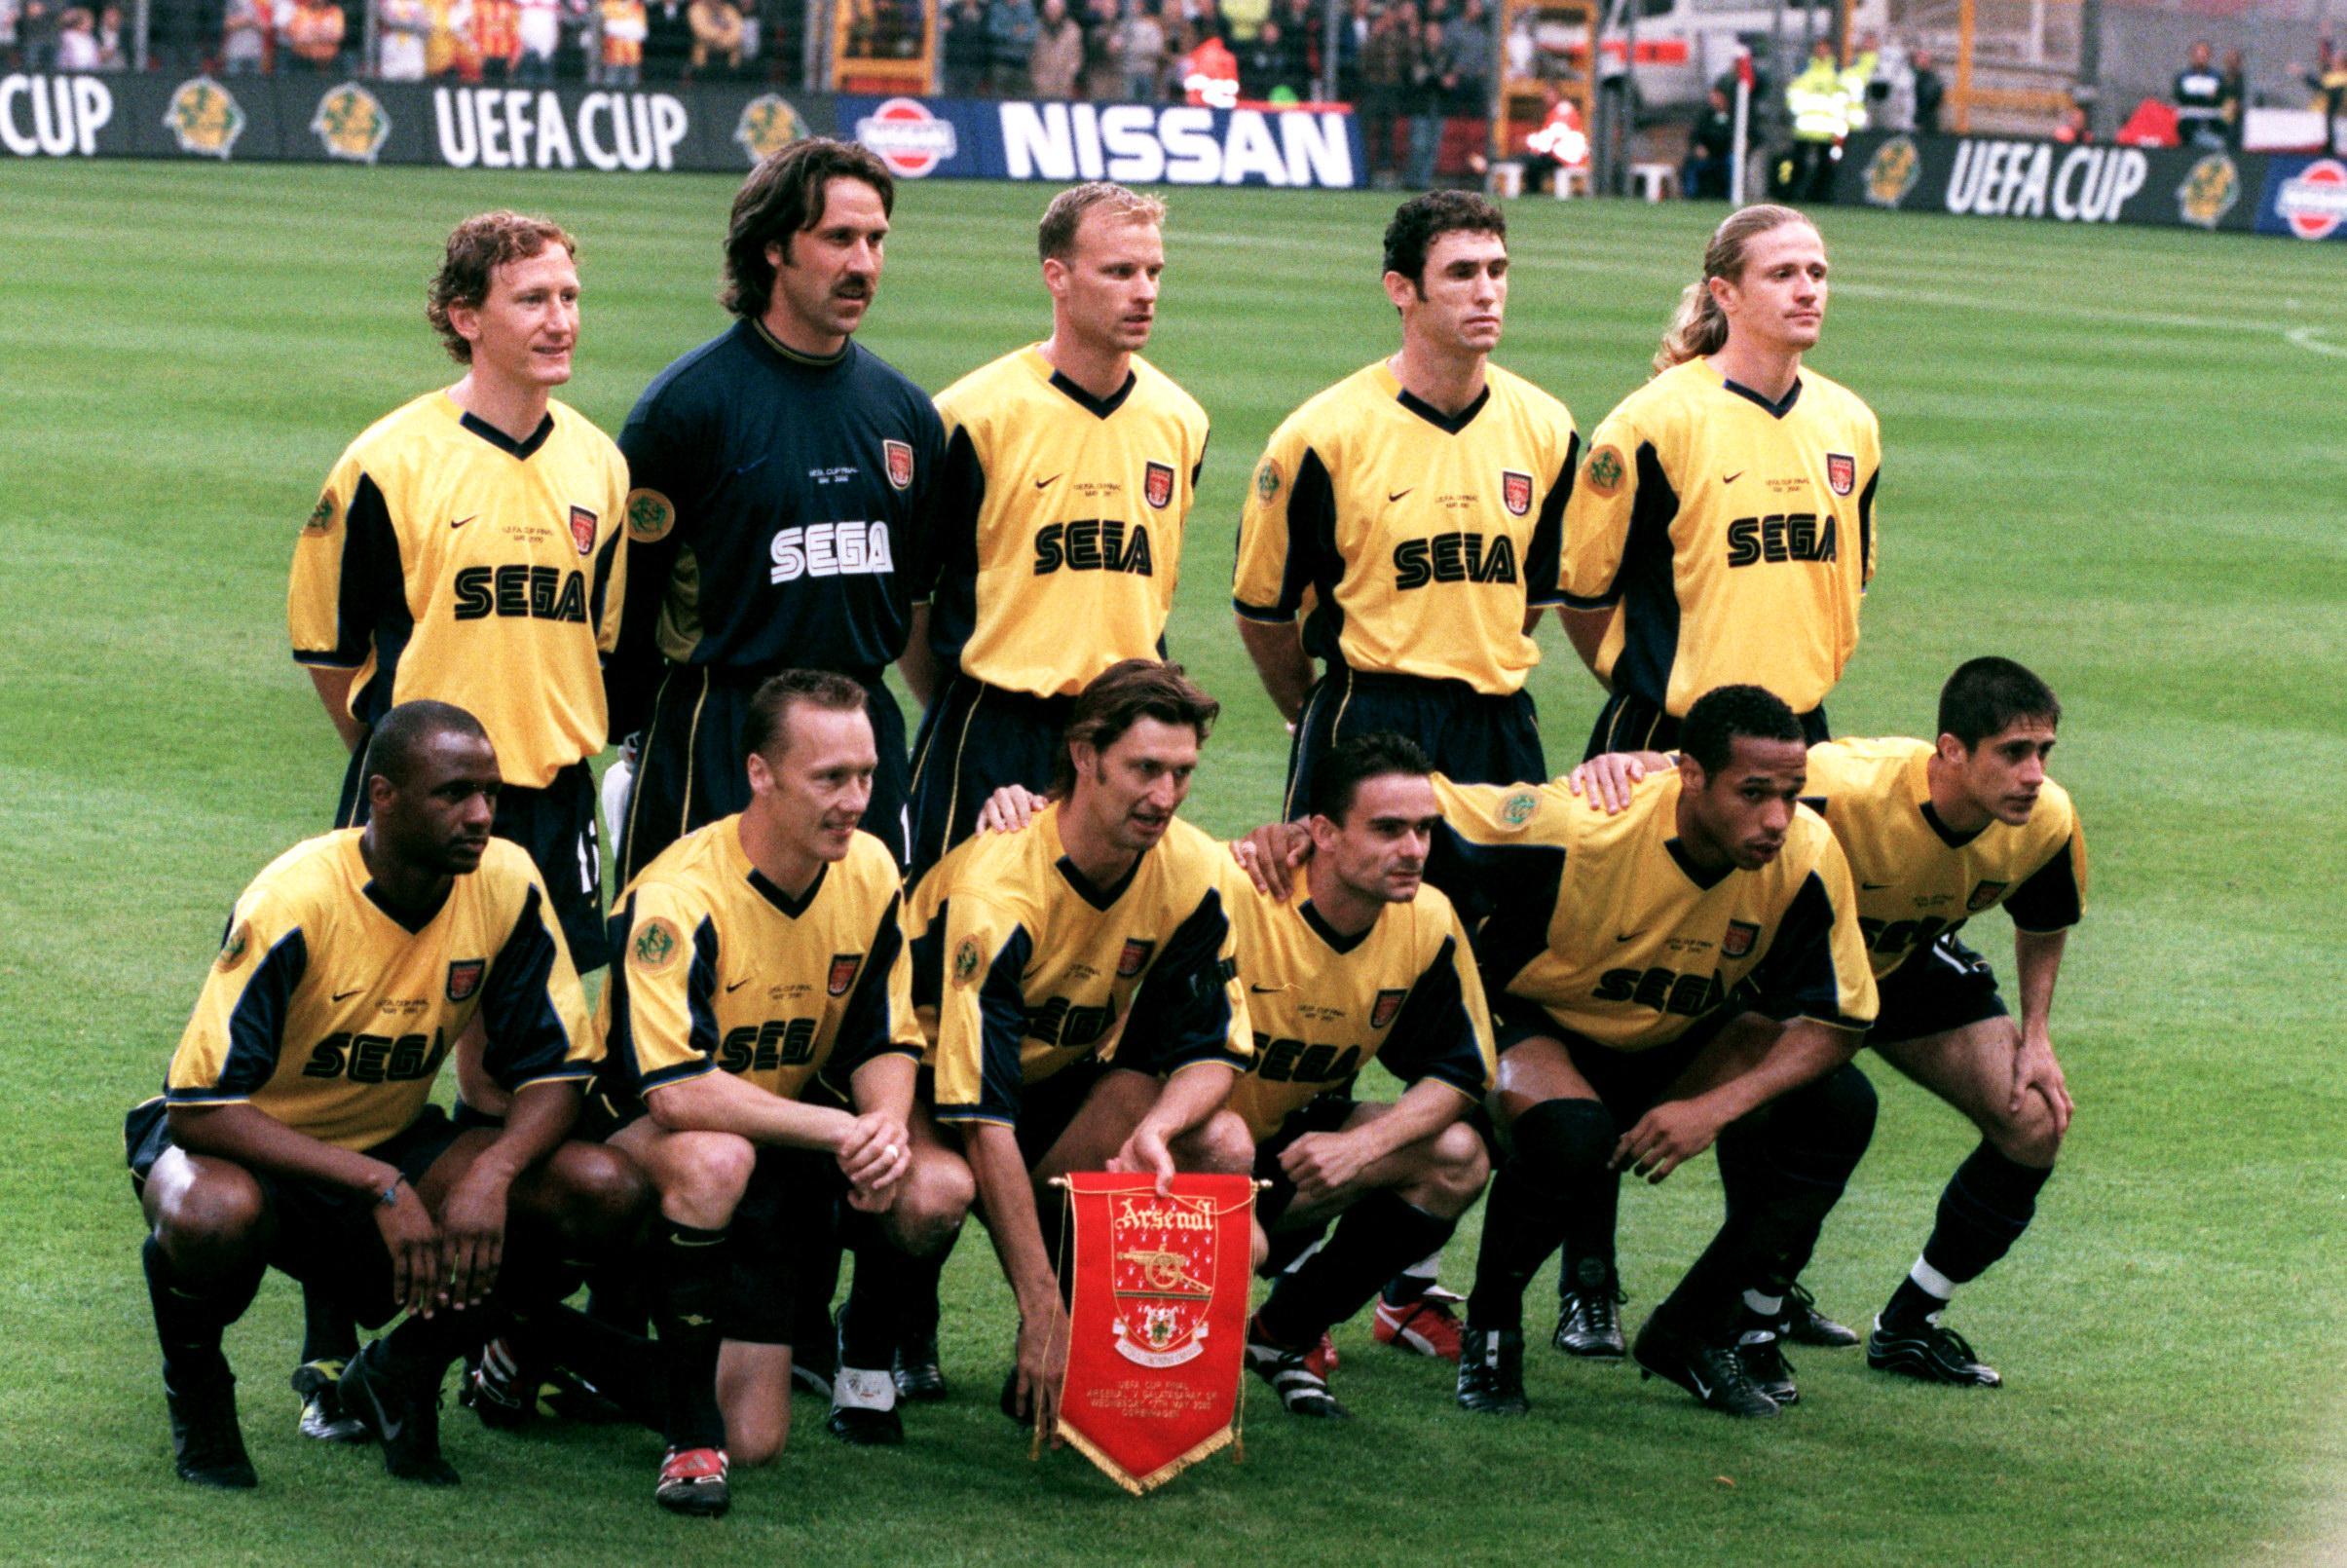 Arsenal players before the 1999/00 Uefa Cup final